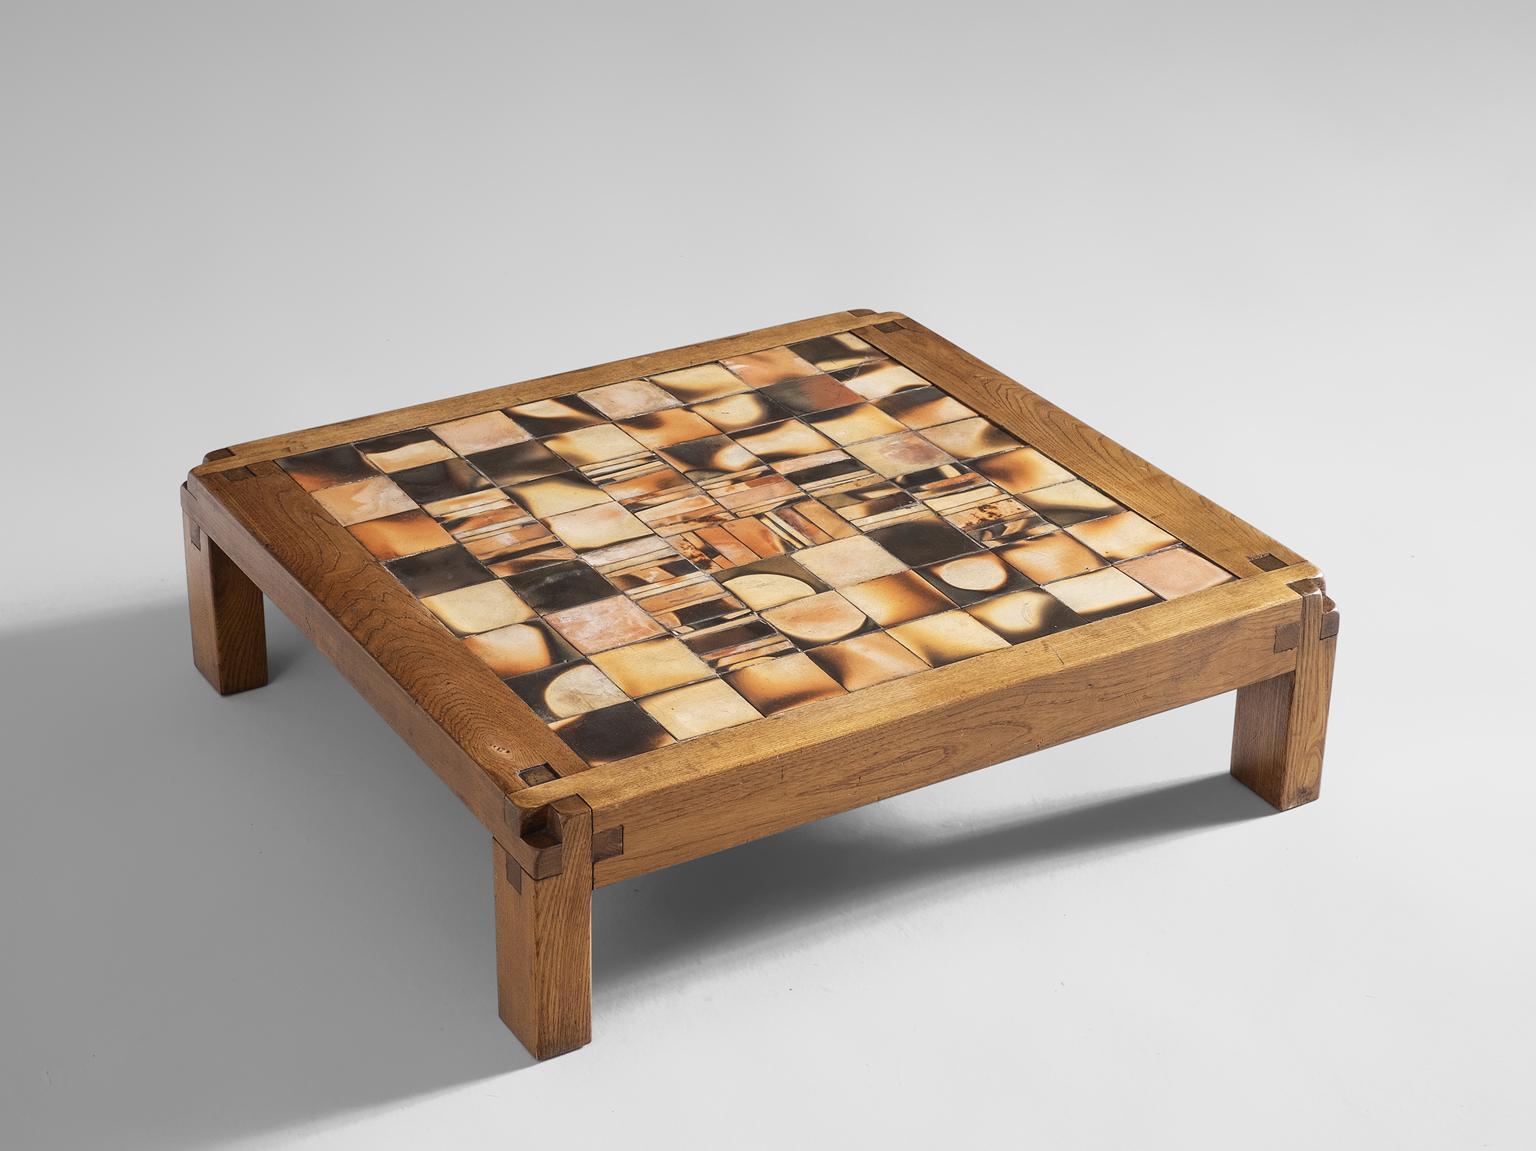 Pierre Chapo, coffee table, elmwood and glazed stoneware, France, 1960s. 

Nearly square coffee table. The wooden construction show absolutely stunning wood joints, a trademark of Chapo. The top is tessellated with 64 glazed tiles, in shades of